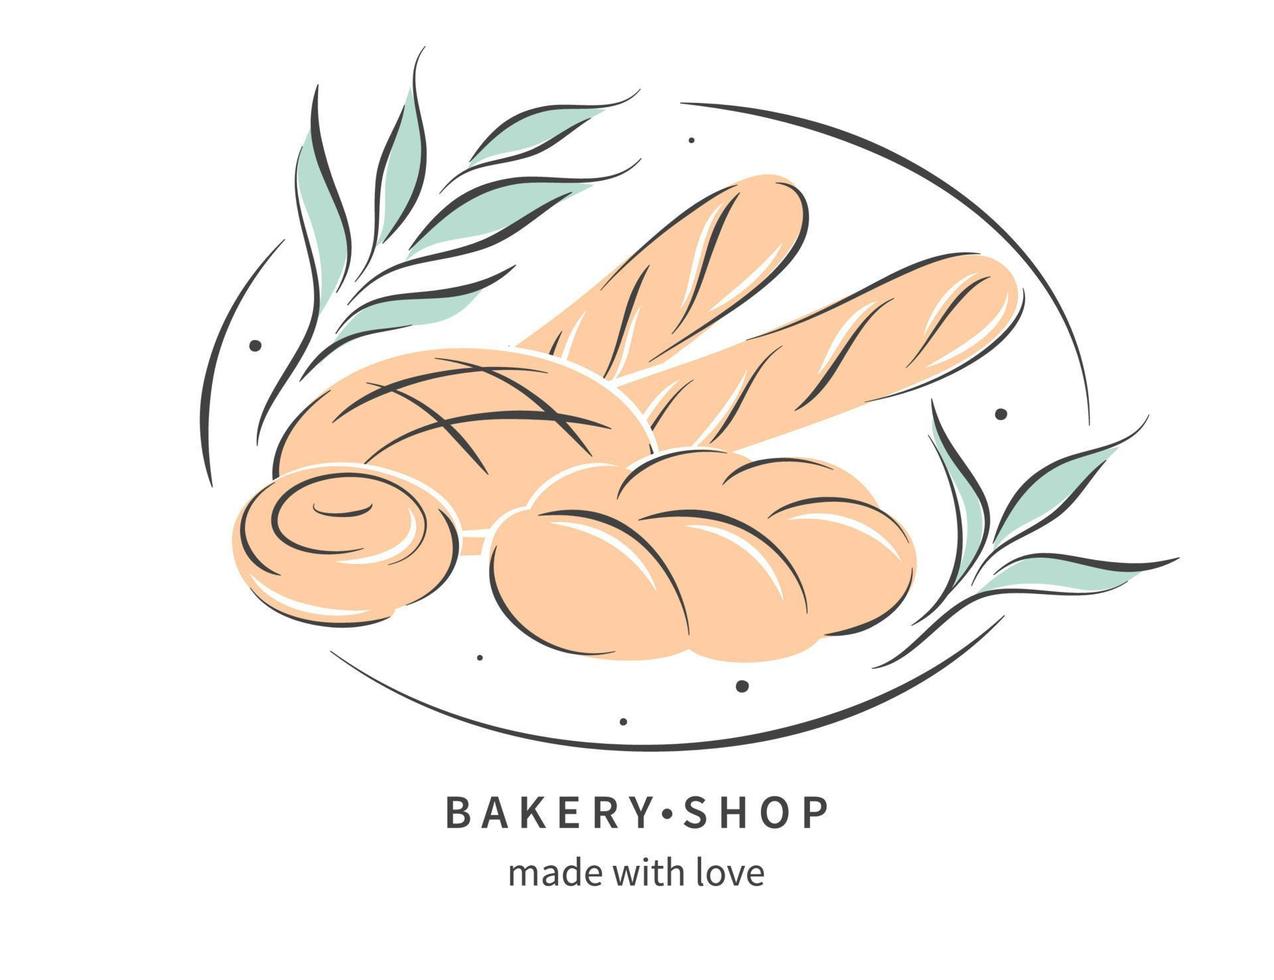 Bakery shop logo with hand drawn bakery products, baguette and bread. Vector illustration for banner, poster, label or menu.